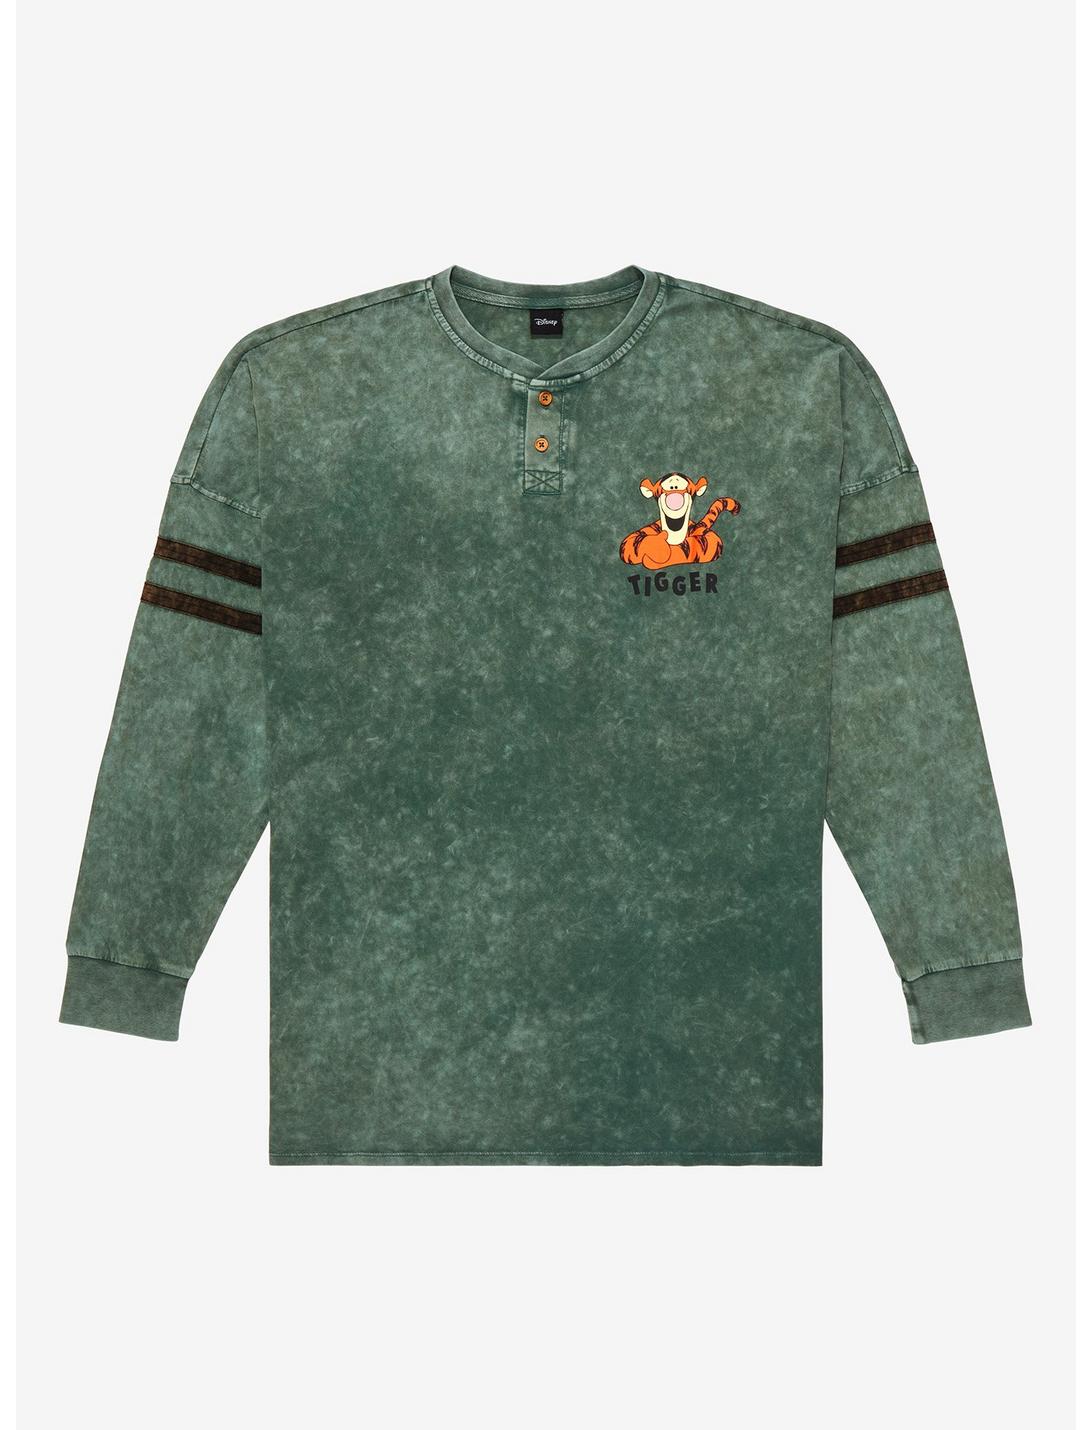 Disney Winnie the Pooh Tigger Henley Hype Jersey - BoxLunch Exclusive , FOREST, hi-res